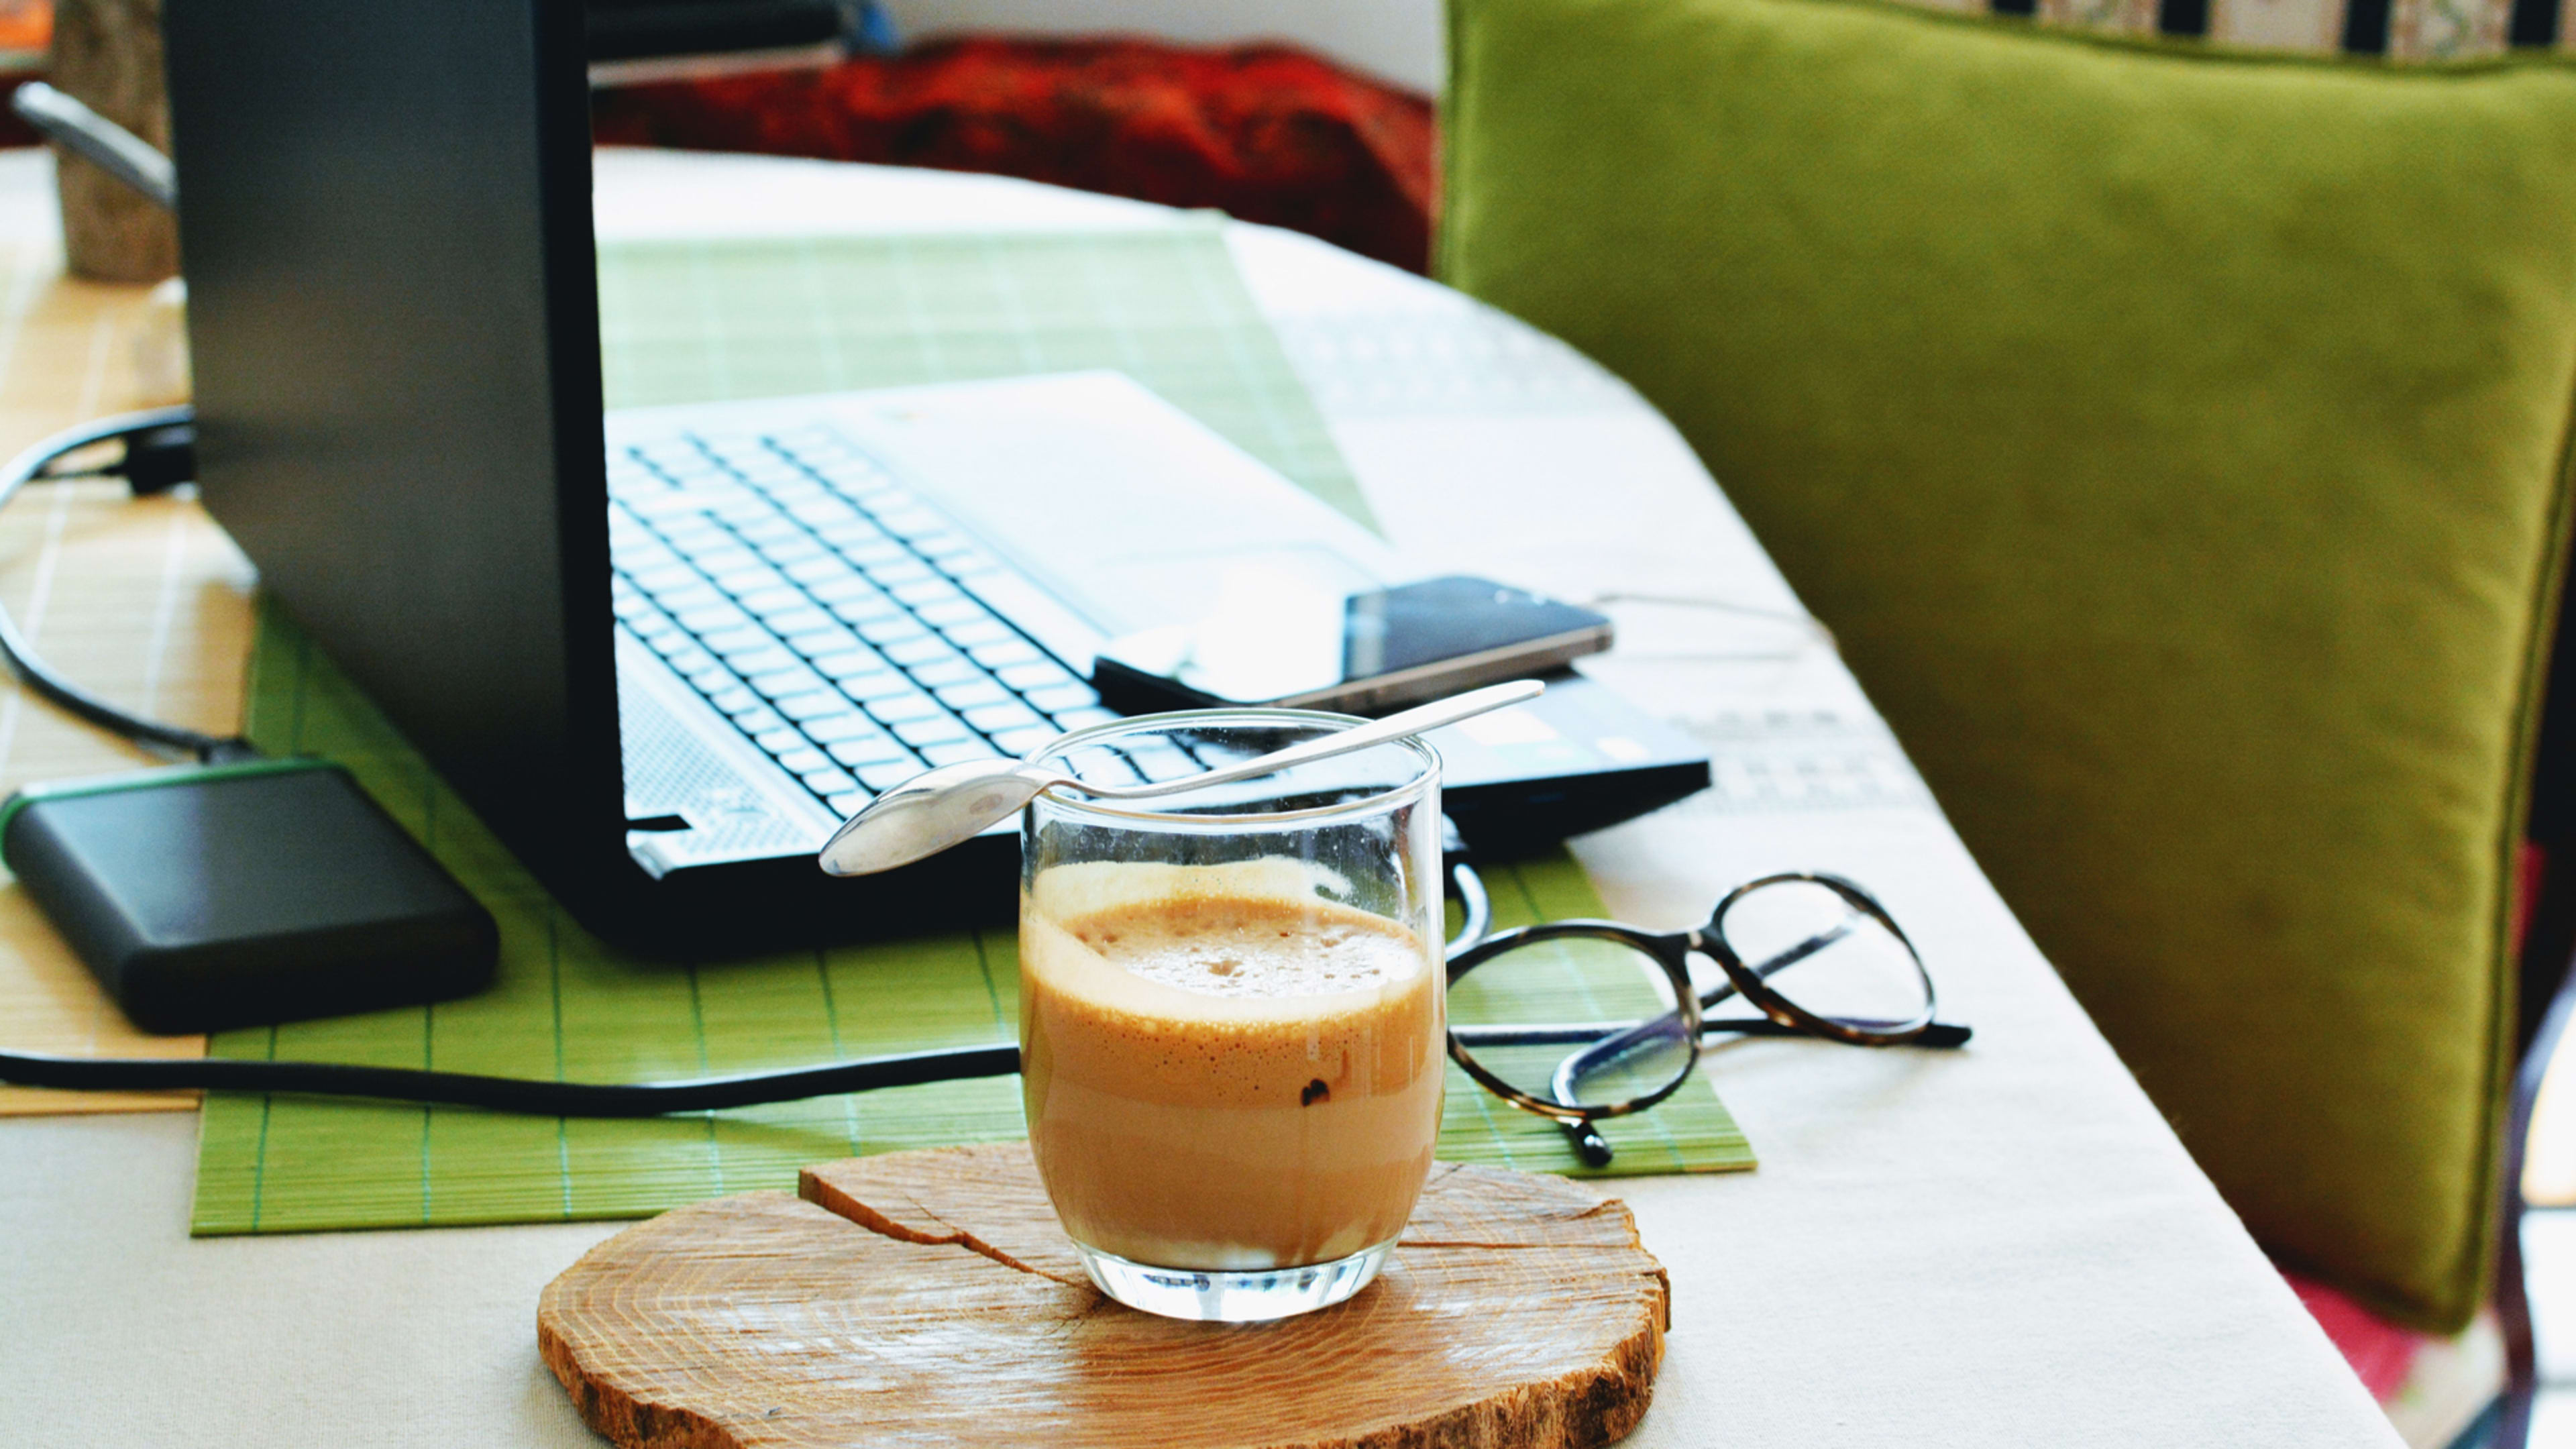 Your ultimate guide to working from home productively